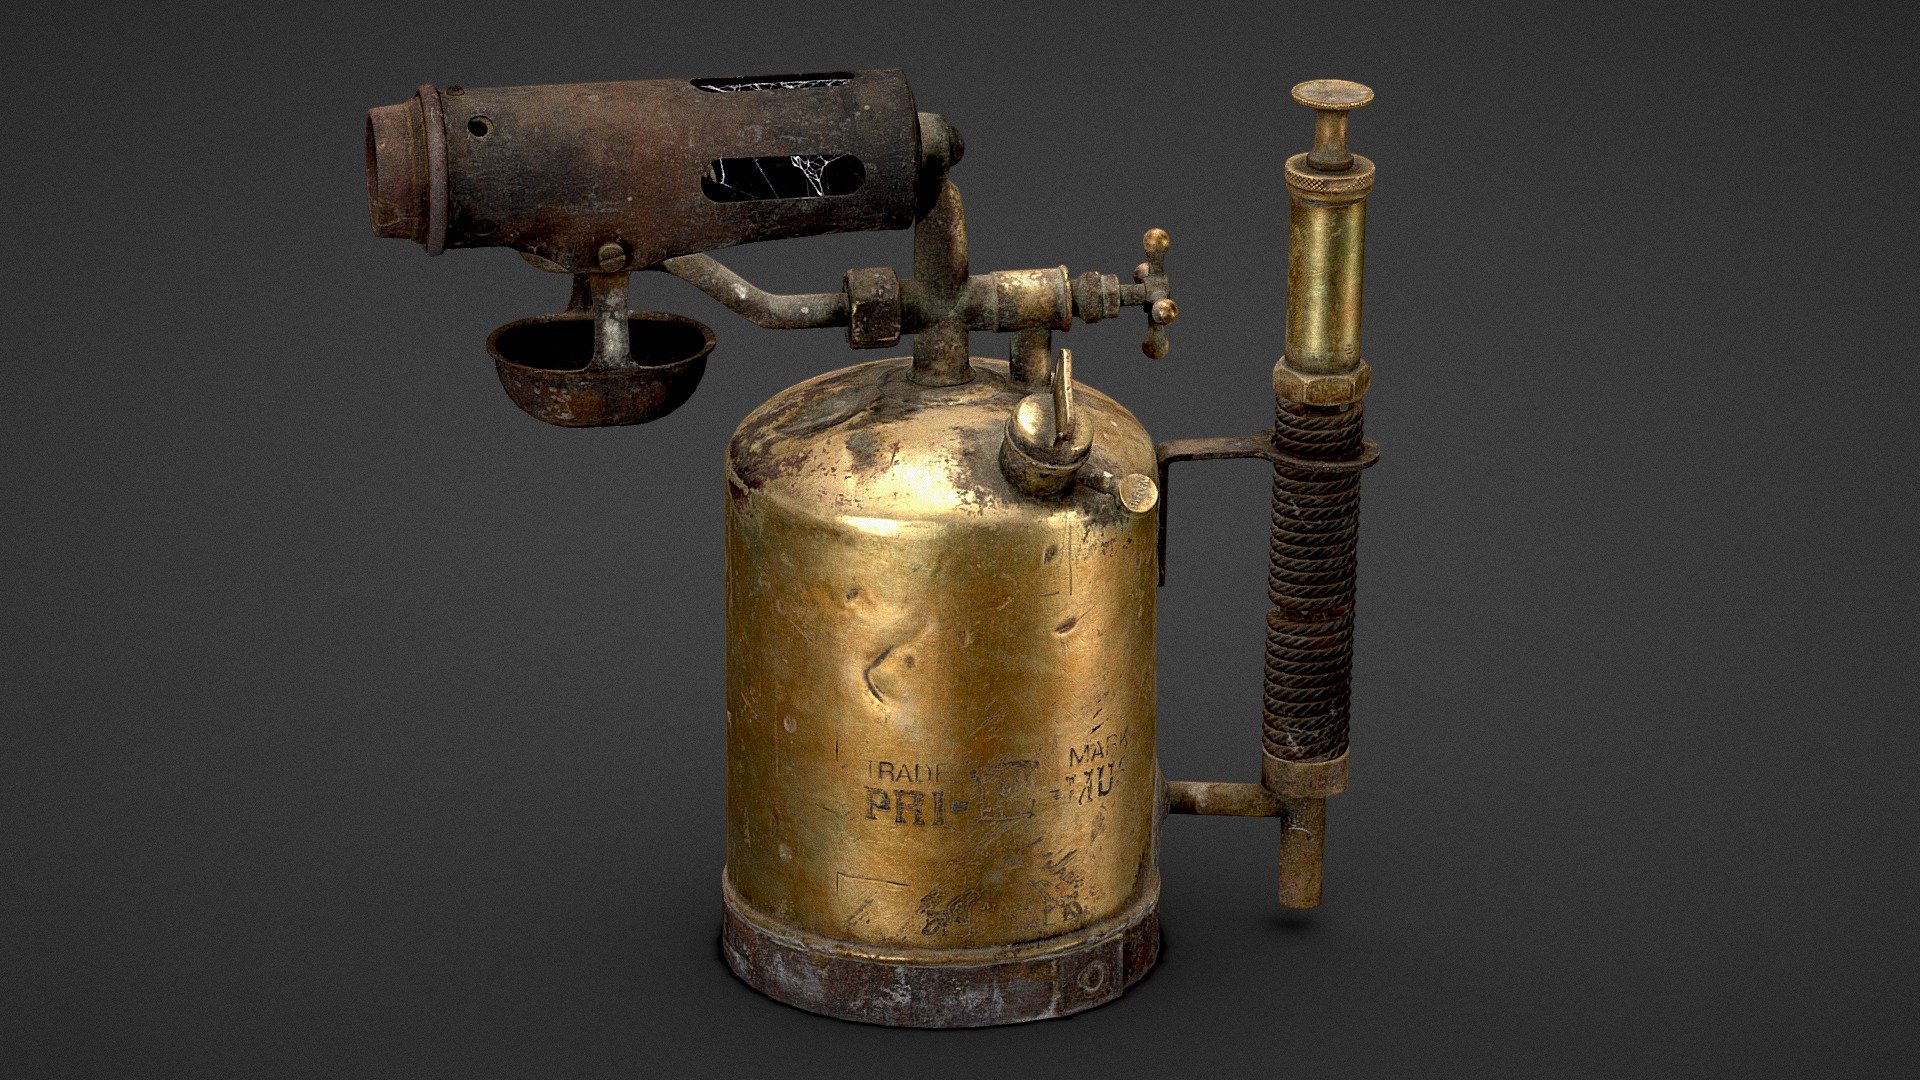 Hello everyone…! An Antique Brass Blowlamp||Gameready (Personal Project)That I was recently working on, The goal of this work was to create a realistic-looking prop. It was a big challenge for me to go deeper into the details of the model, sculpting, and materials and create something very close to photorealism. I am very thankful to my friends who gave me their valuable feedback on this project.

for more Render visit my artstation:
https://www.artstation.com/artwork/yJYZyO

Hope you like it ^ - ^ - Antique Brass Blowlamp||Prop Study - 3D model by taufeeqali (@taufeeq) 3d model